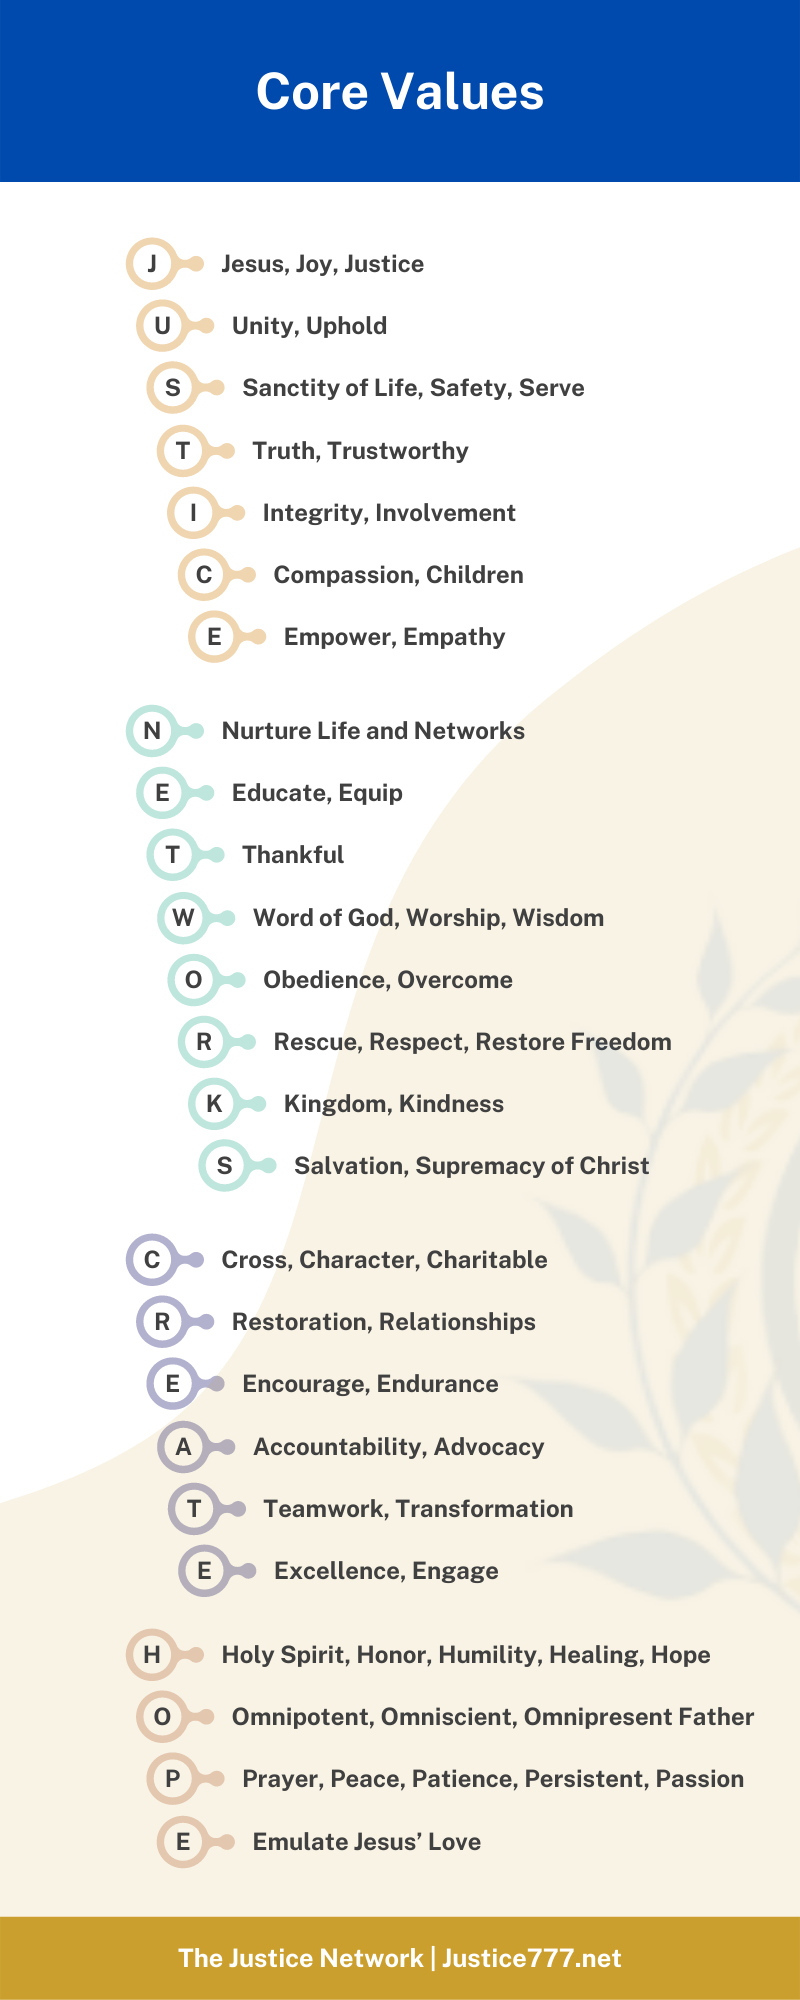 Justice Network Core Values image